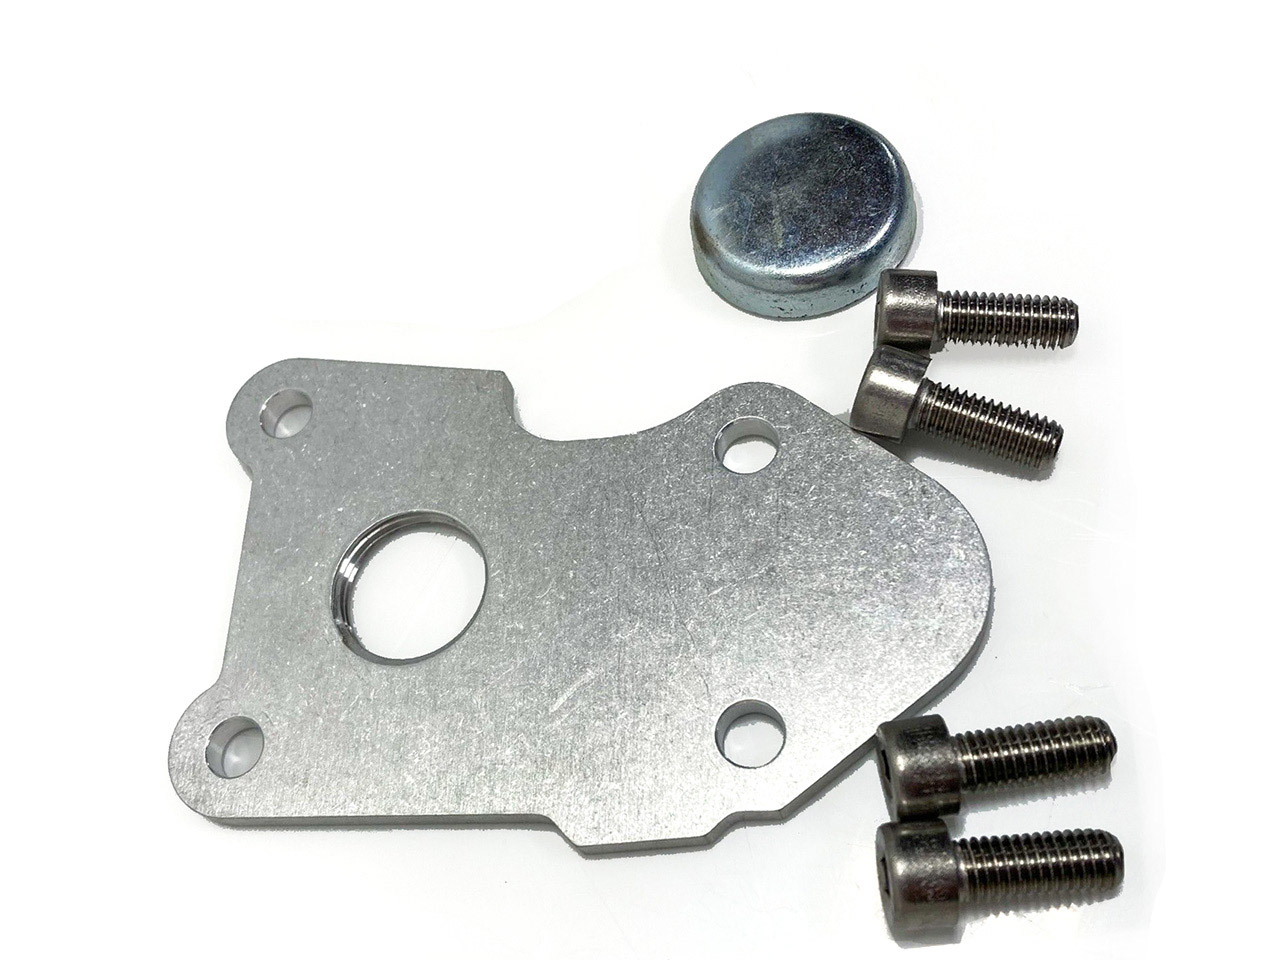 VW ABA block off plate (MK1 CIS injection)